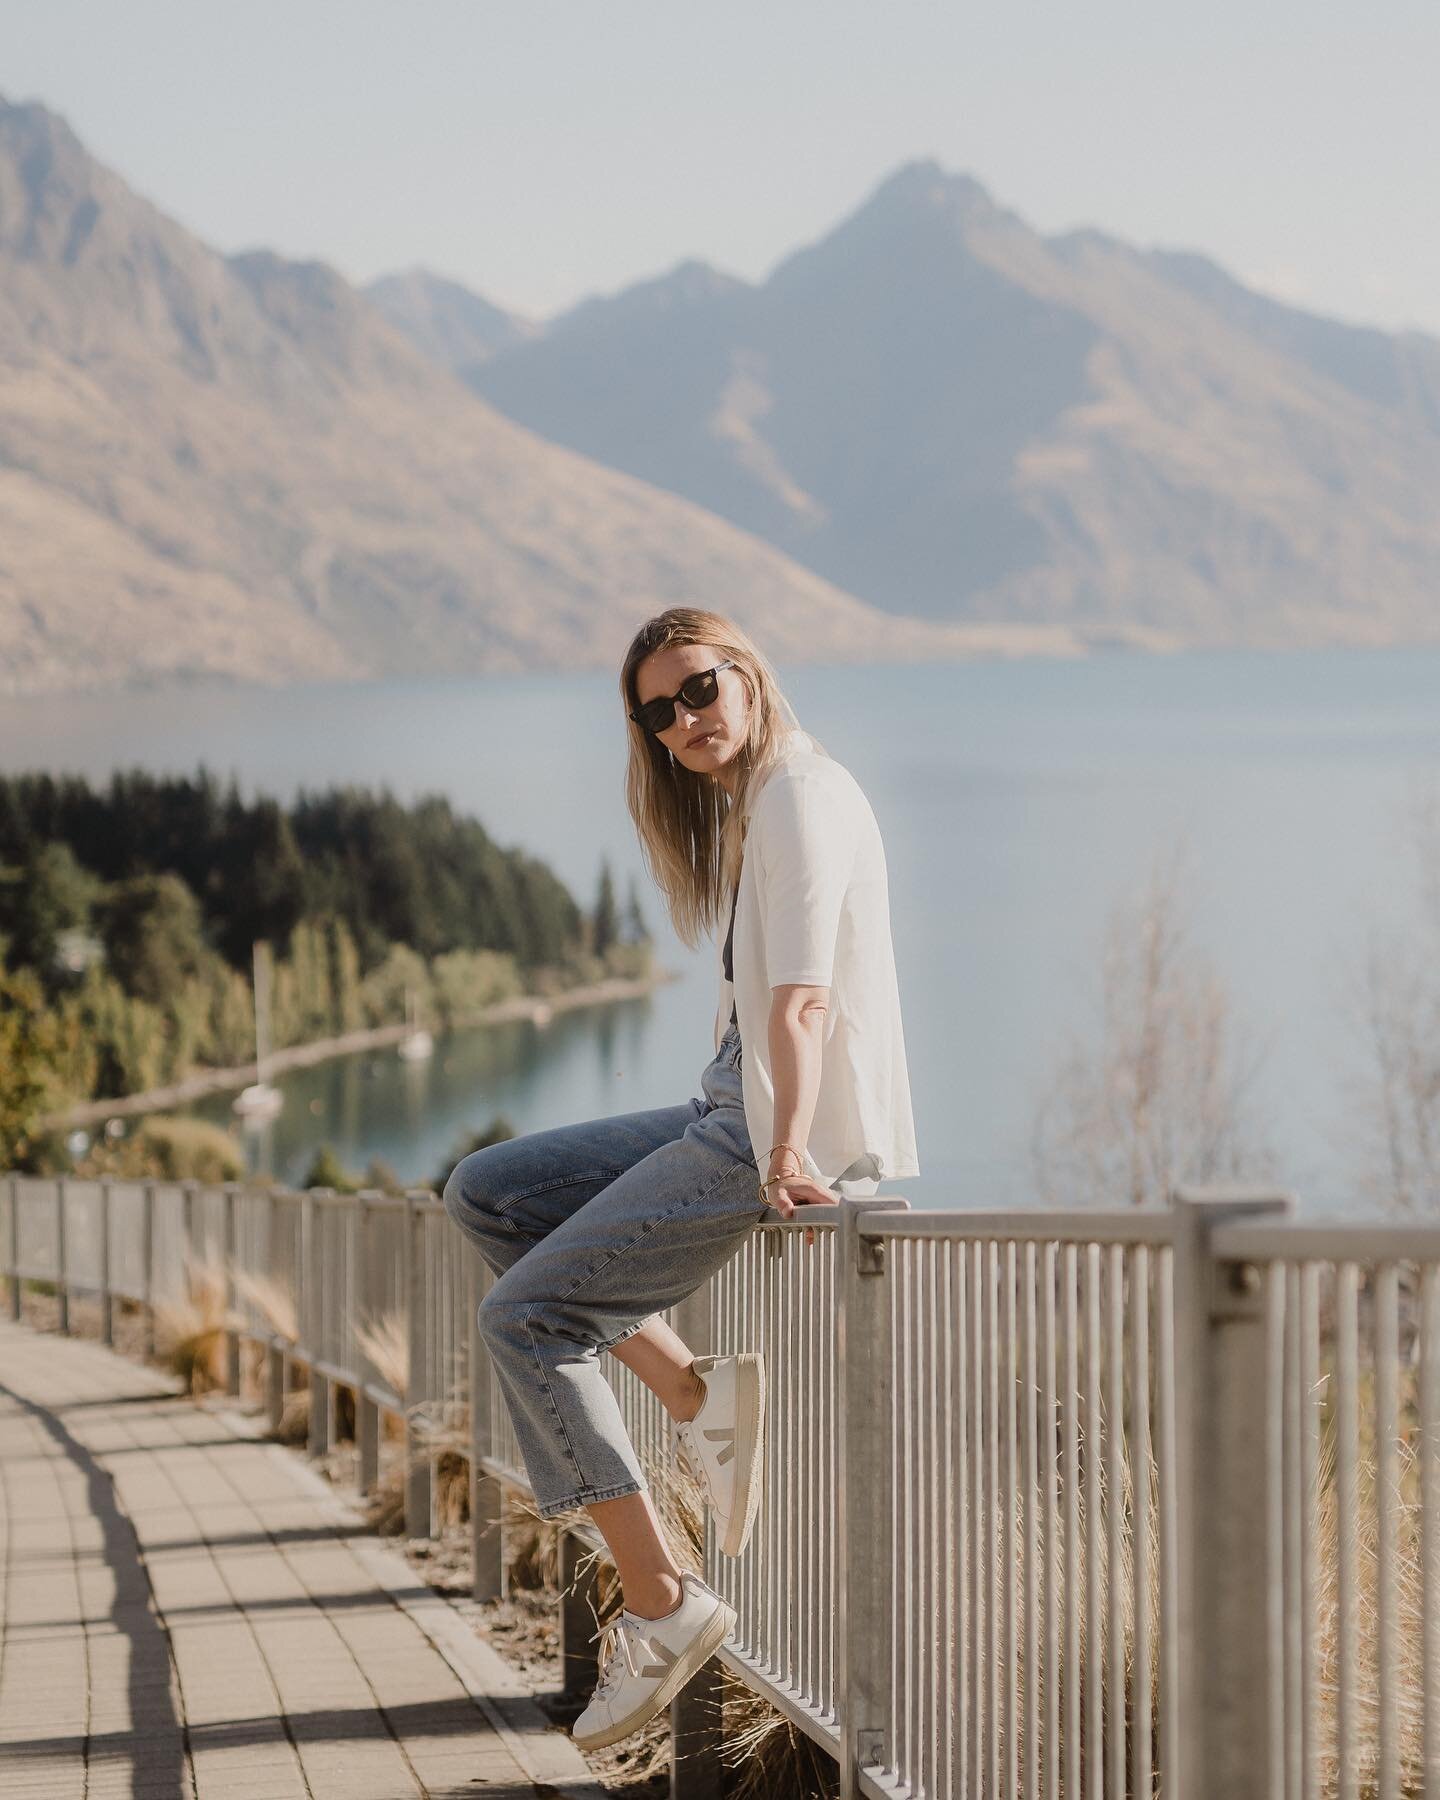 Five star views everywhere you look and I&rsquo;m enjoying them in my new looks from @BananaRepublicAustralia. Whether you&rsquo;re taking a cruise on the TSS Earnslaw, hopping to vineyards in Gibbston Valley or sipping champagne from the top of the 